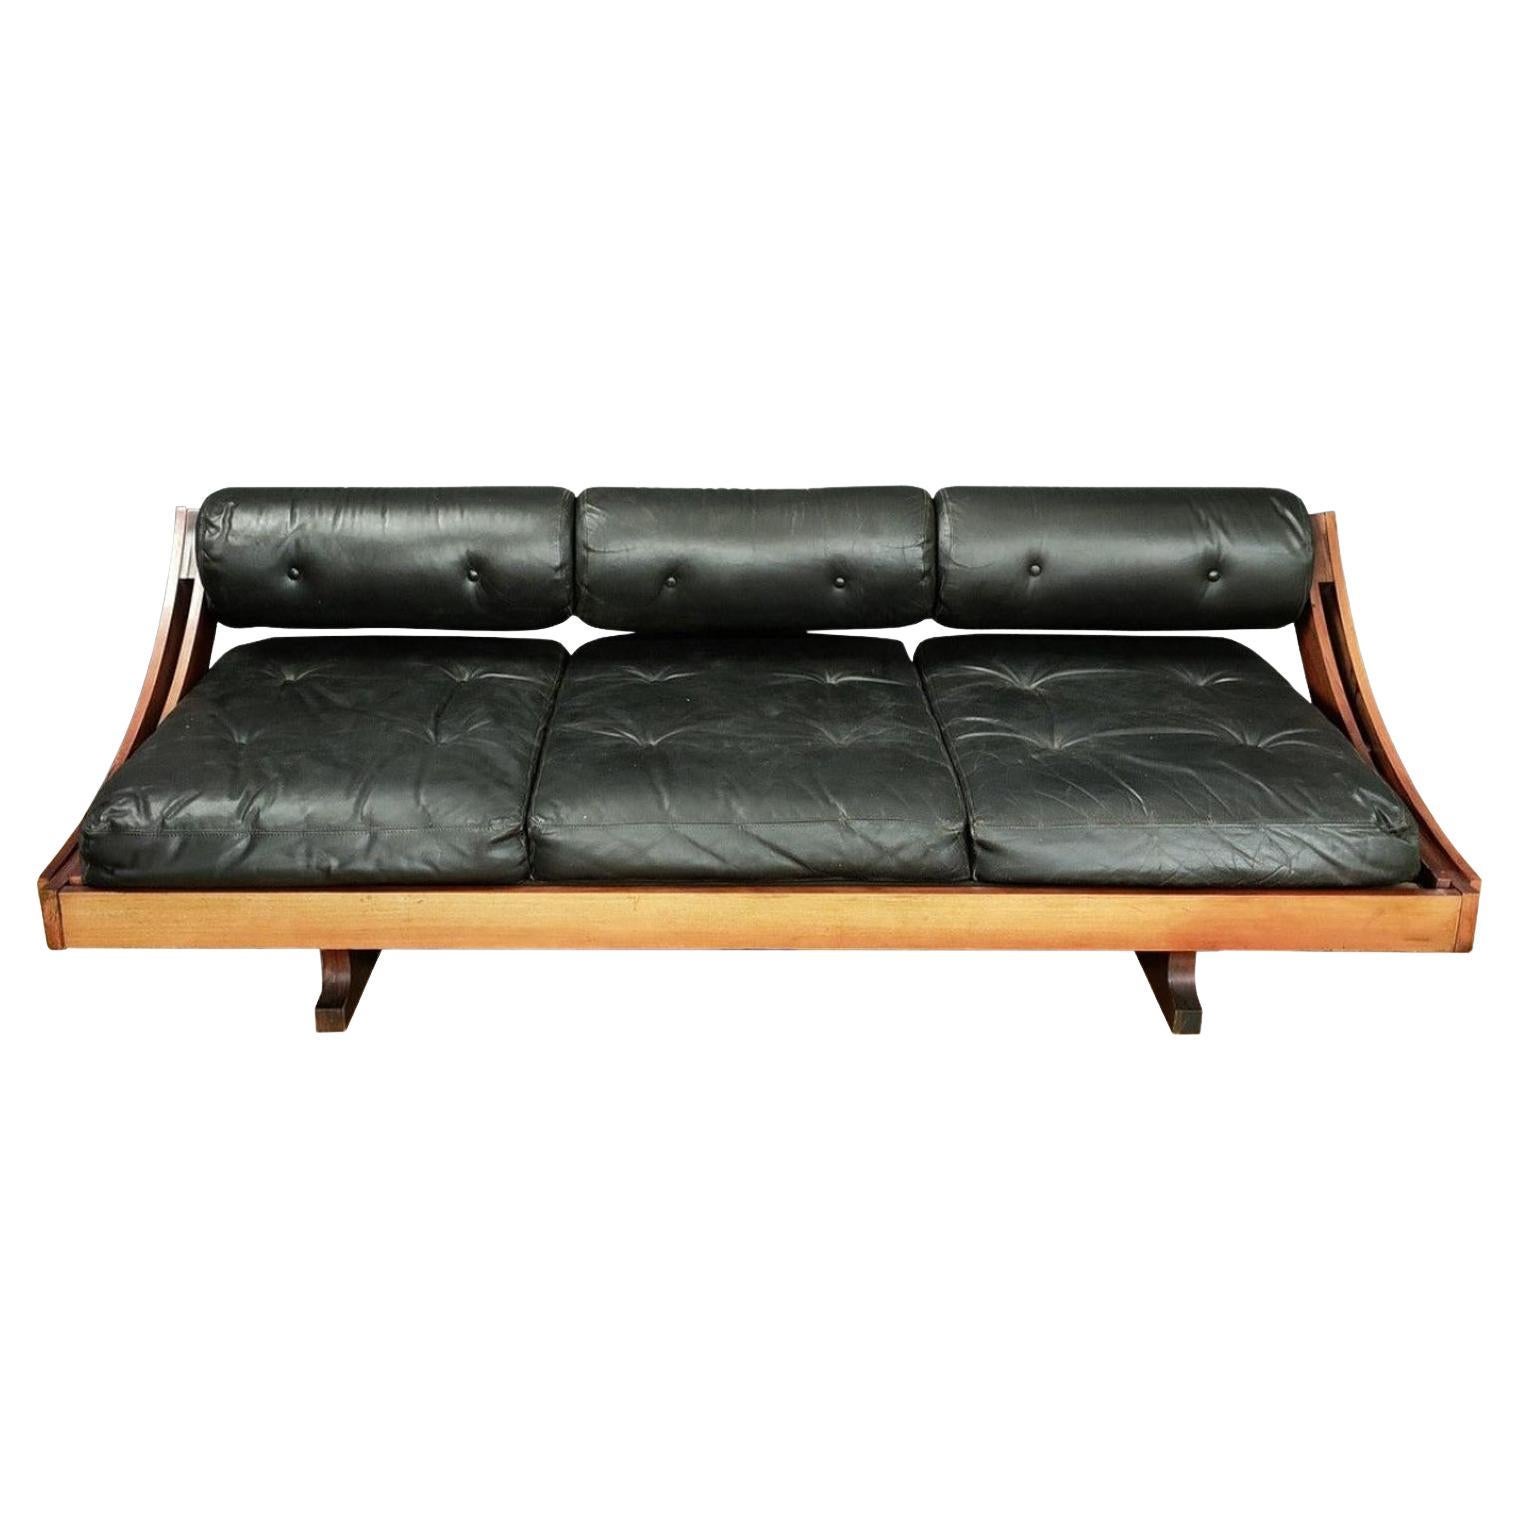 Italian Mid-Century Sofa/Daybed by Gianni Songia for Sormani